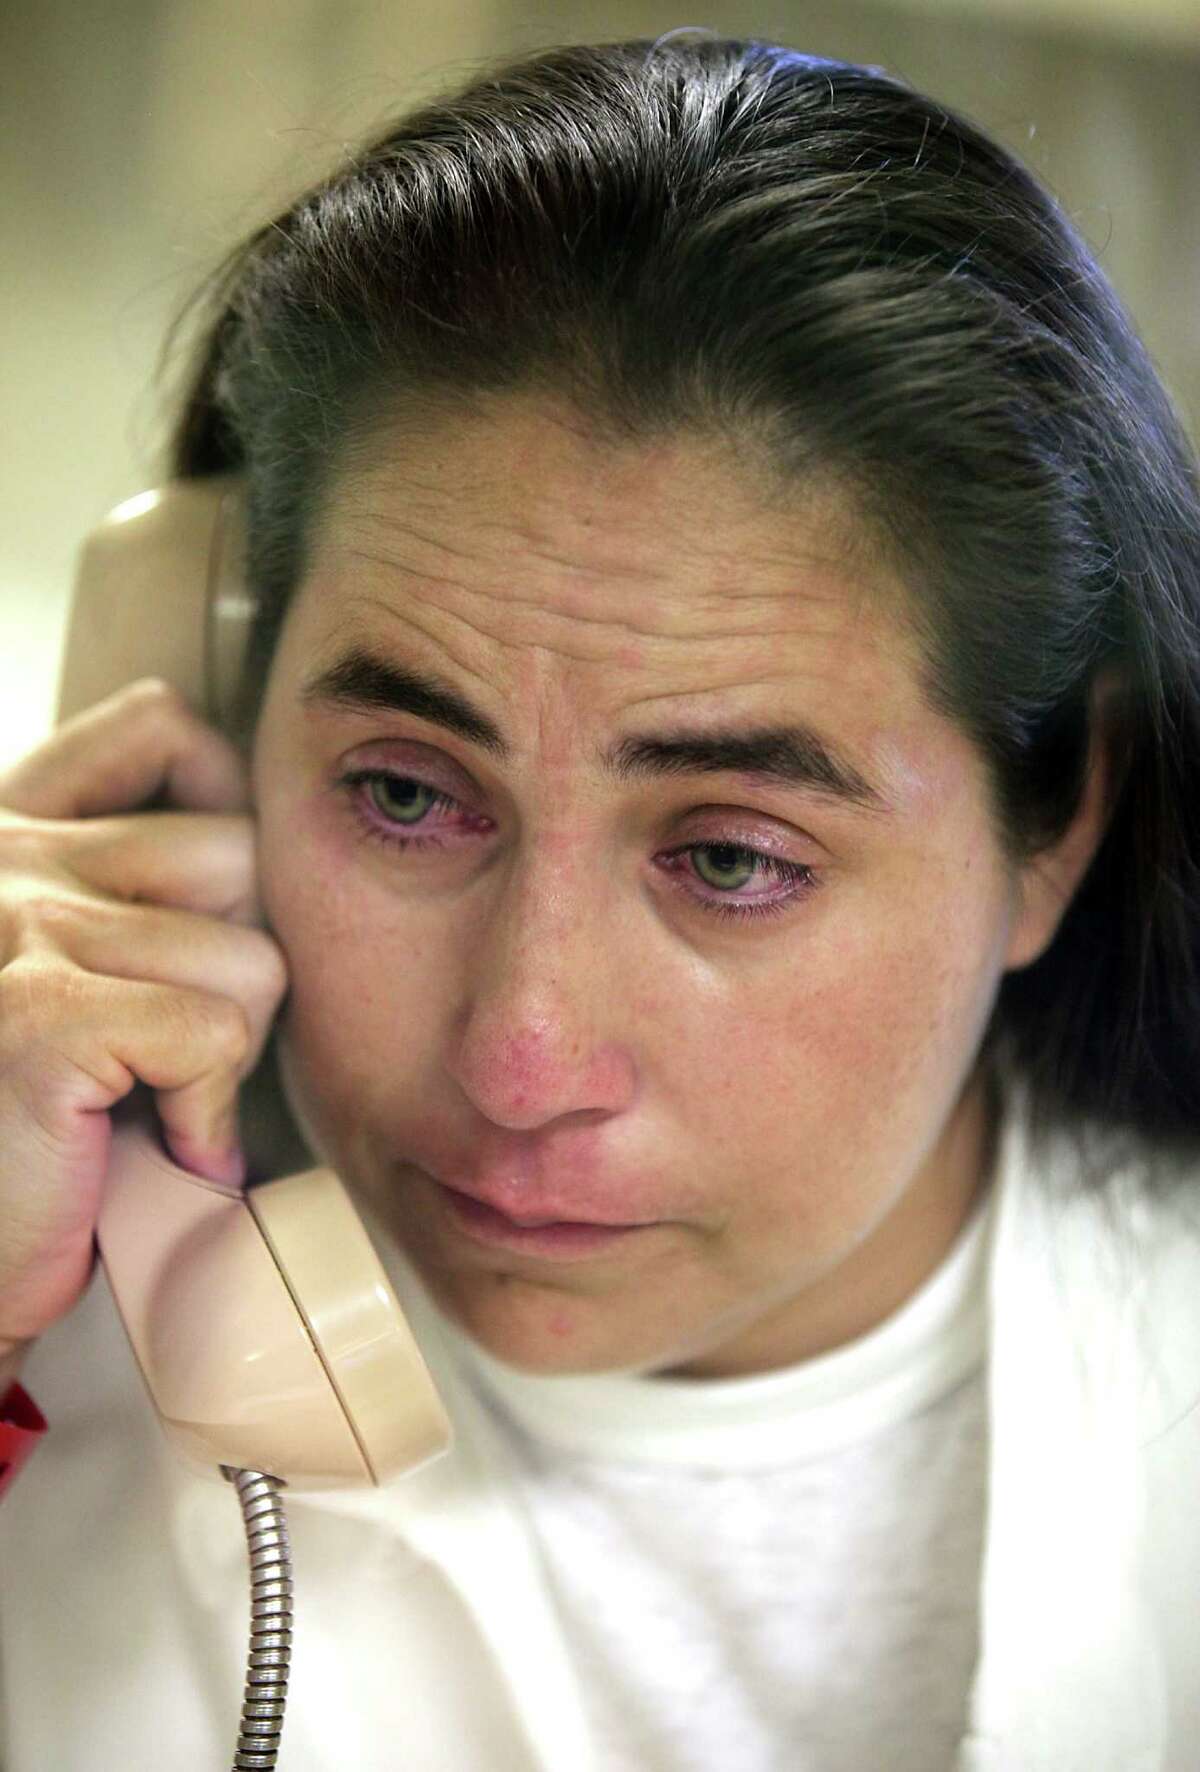 A tearful Anna Vasquez, 37, who was accused in 1994 of aggravated sexual assault of a child, speaks on a phone during a prison interview. She is incarcerated at the Murray Unit, in Gatesville, TX. Tuesday September 4, 2012.